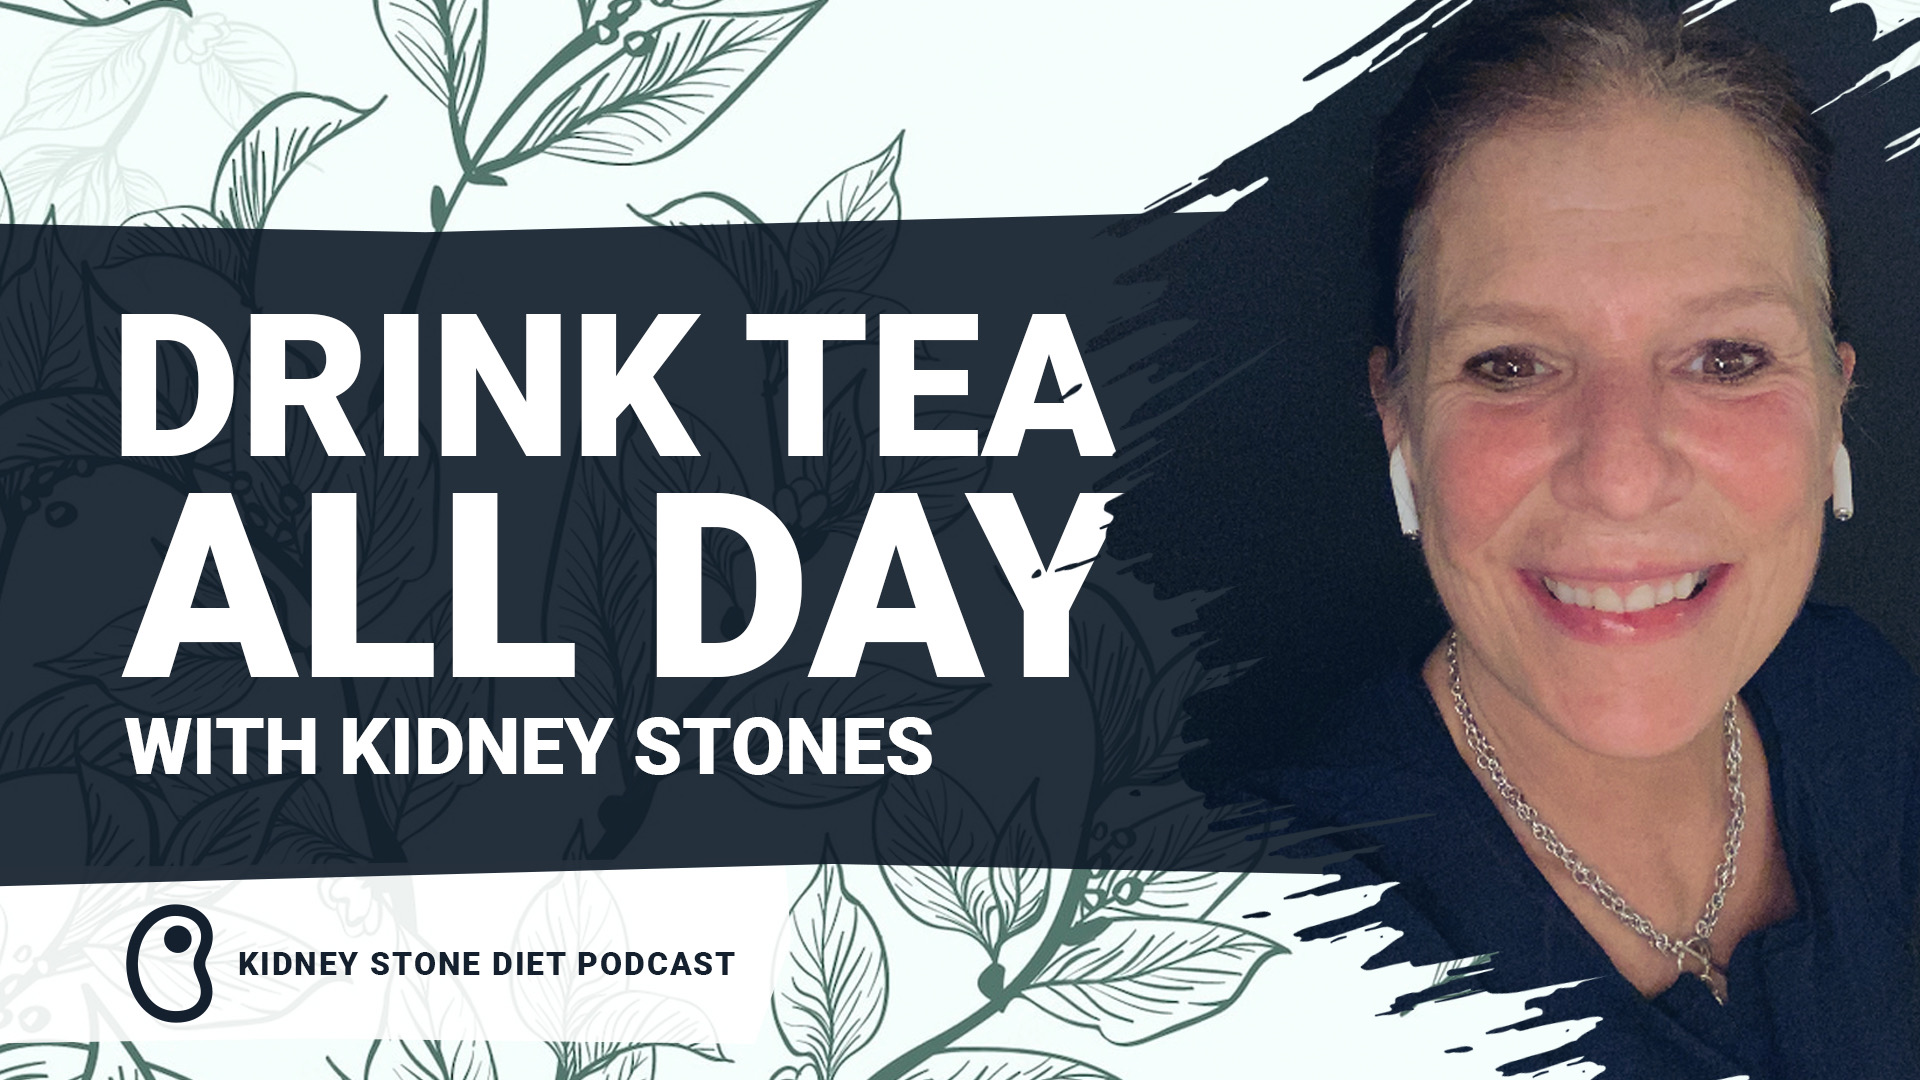 Drink tea all day long with kidney stones